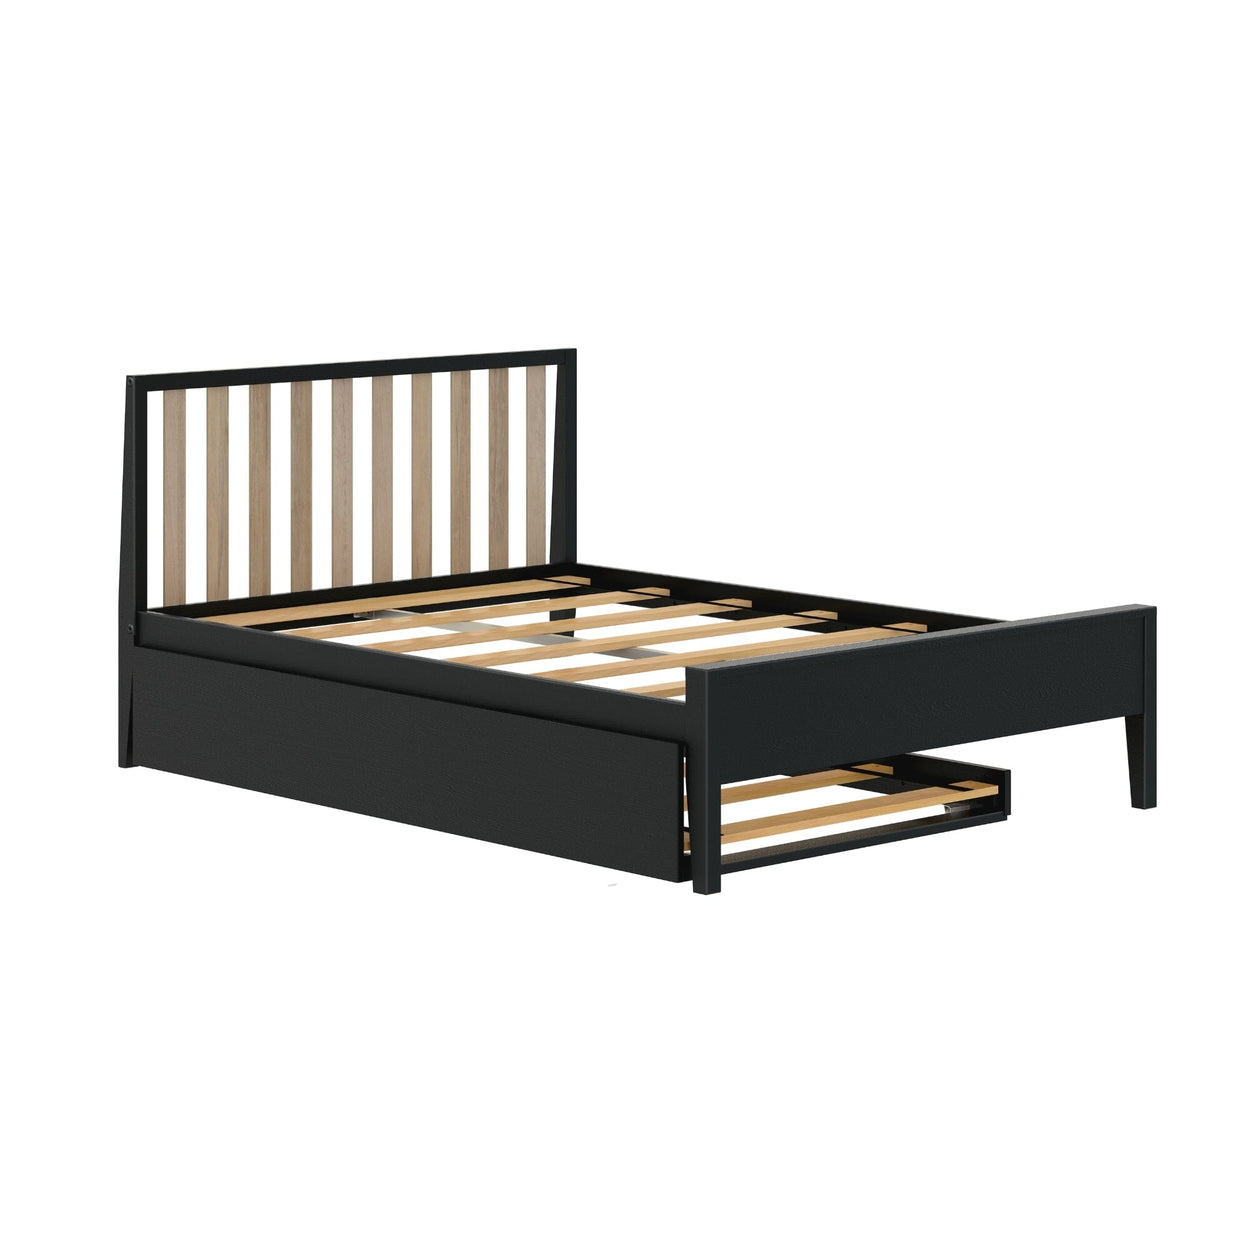 216211-272 : Kids Beds Scandinavian Full-Size Bed with Twin-Size Trundle, Black/Blonde